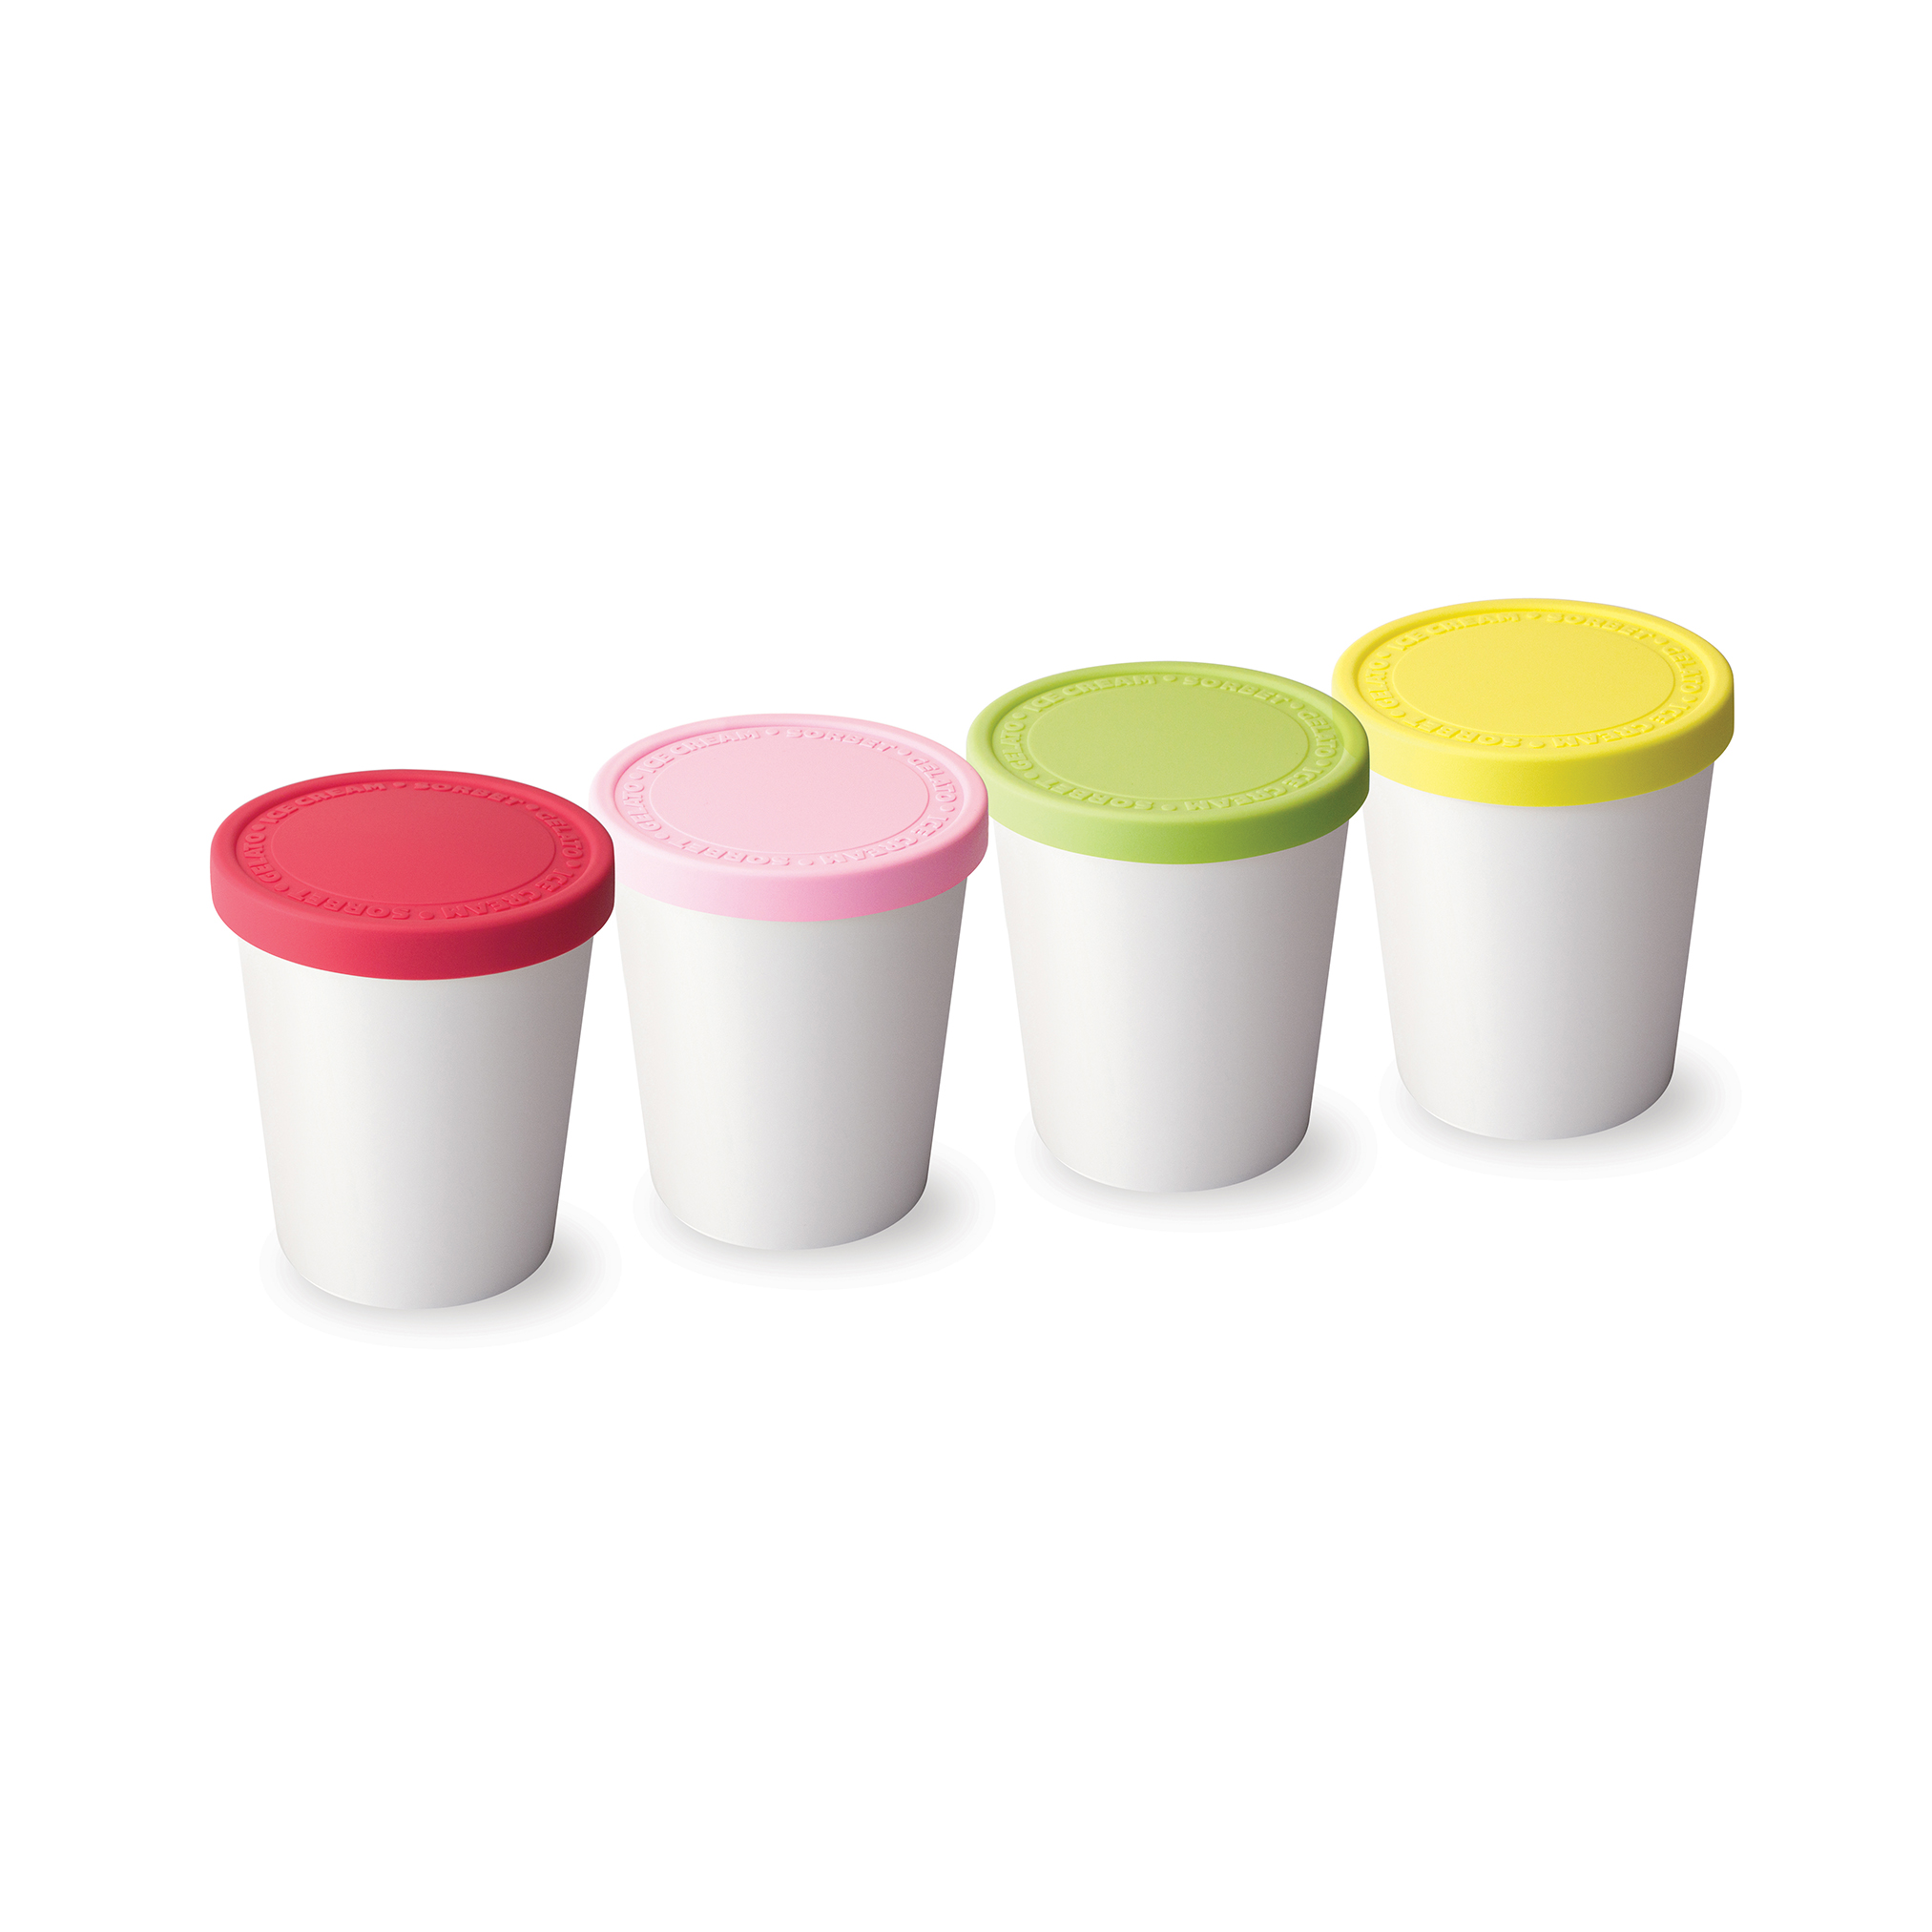 StarPack Long Scoop Ice Cream Freezer Storage Container - for Home